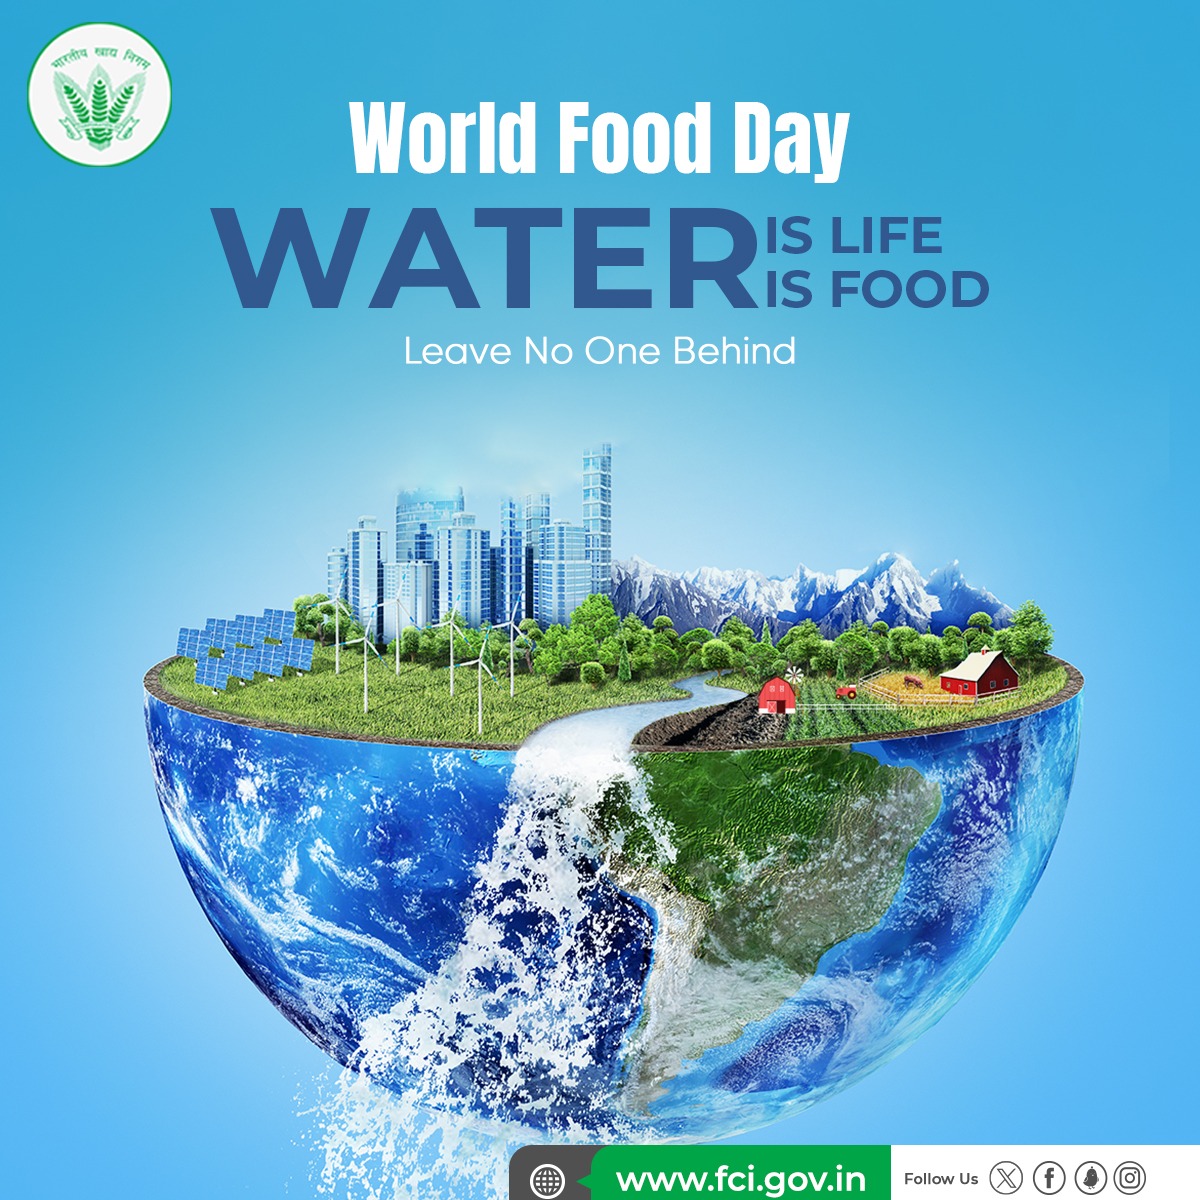 Let's take a step forward this World Food Day to conserve water, reduce food waste, and end global hunger.  #WorldFoodDay2023 #WaterAction  #SeedsOfChange